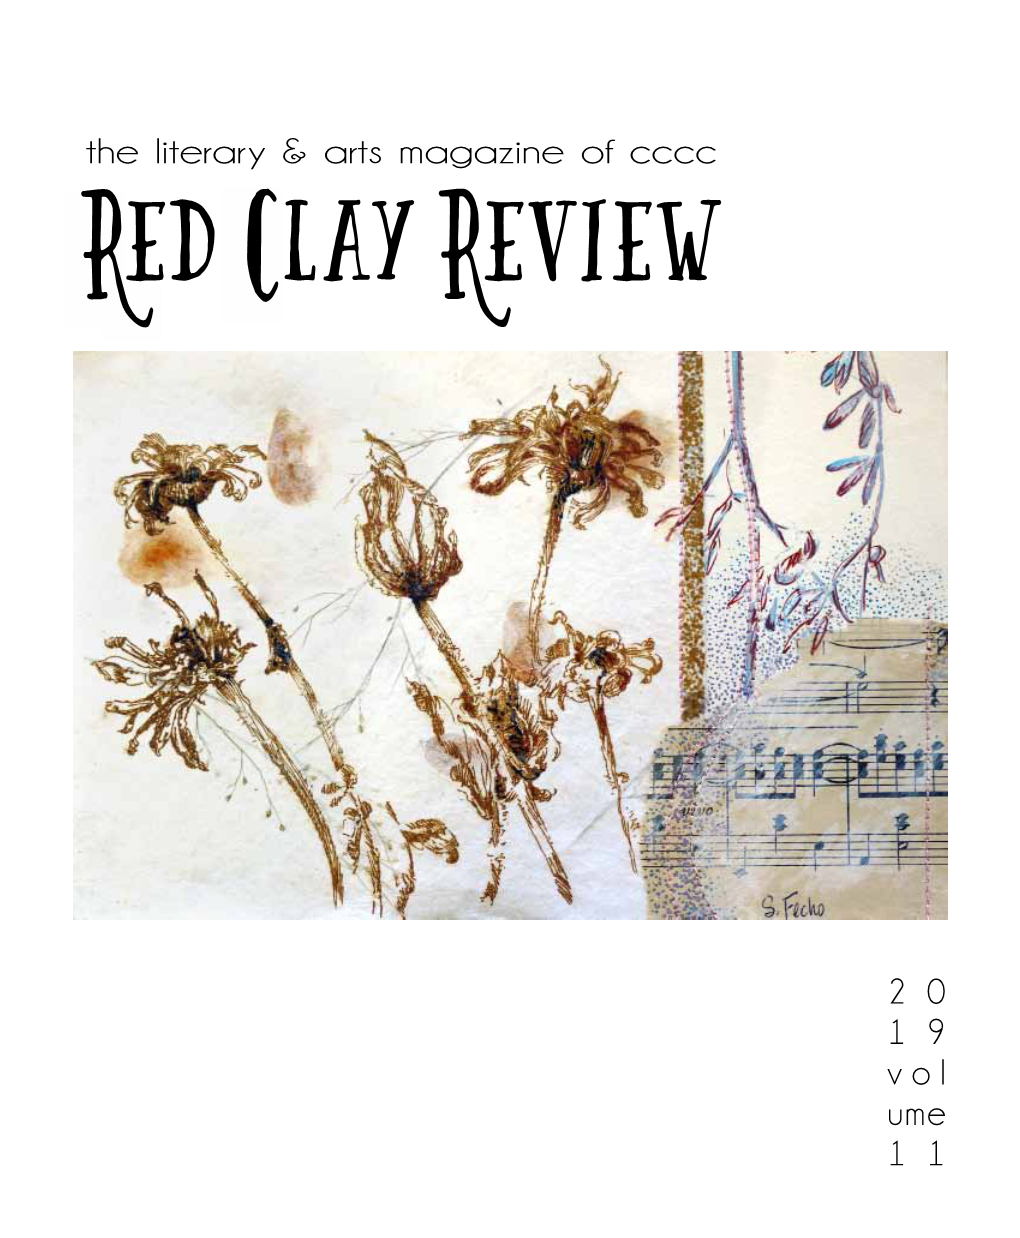 2019 Issue of the Red Clay Review